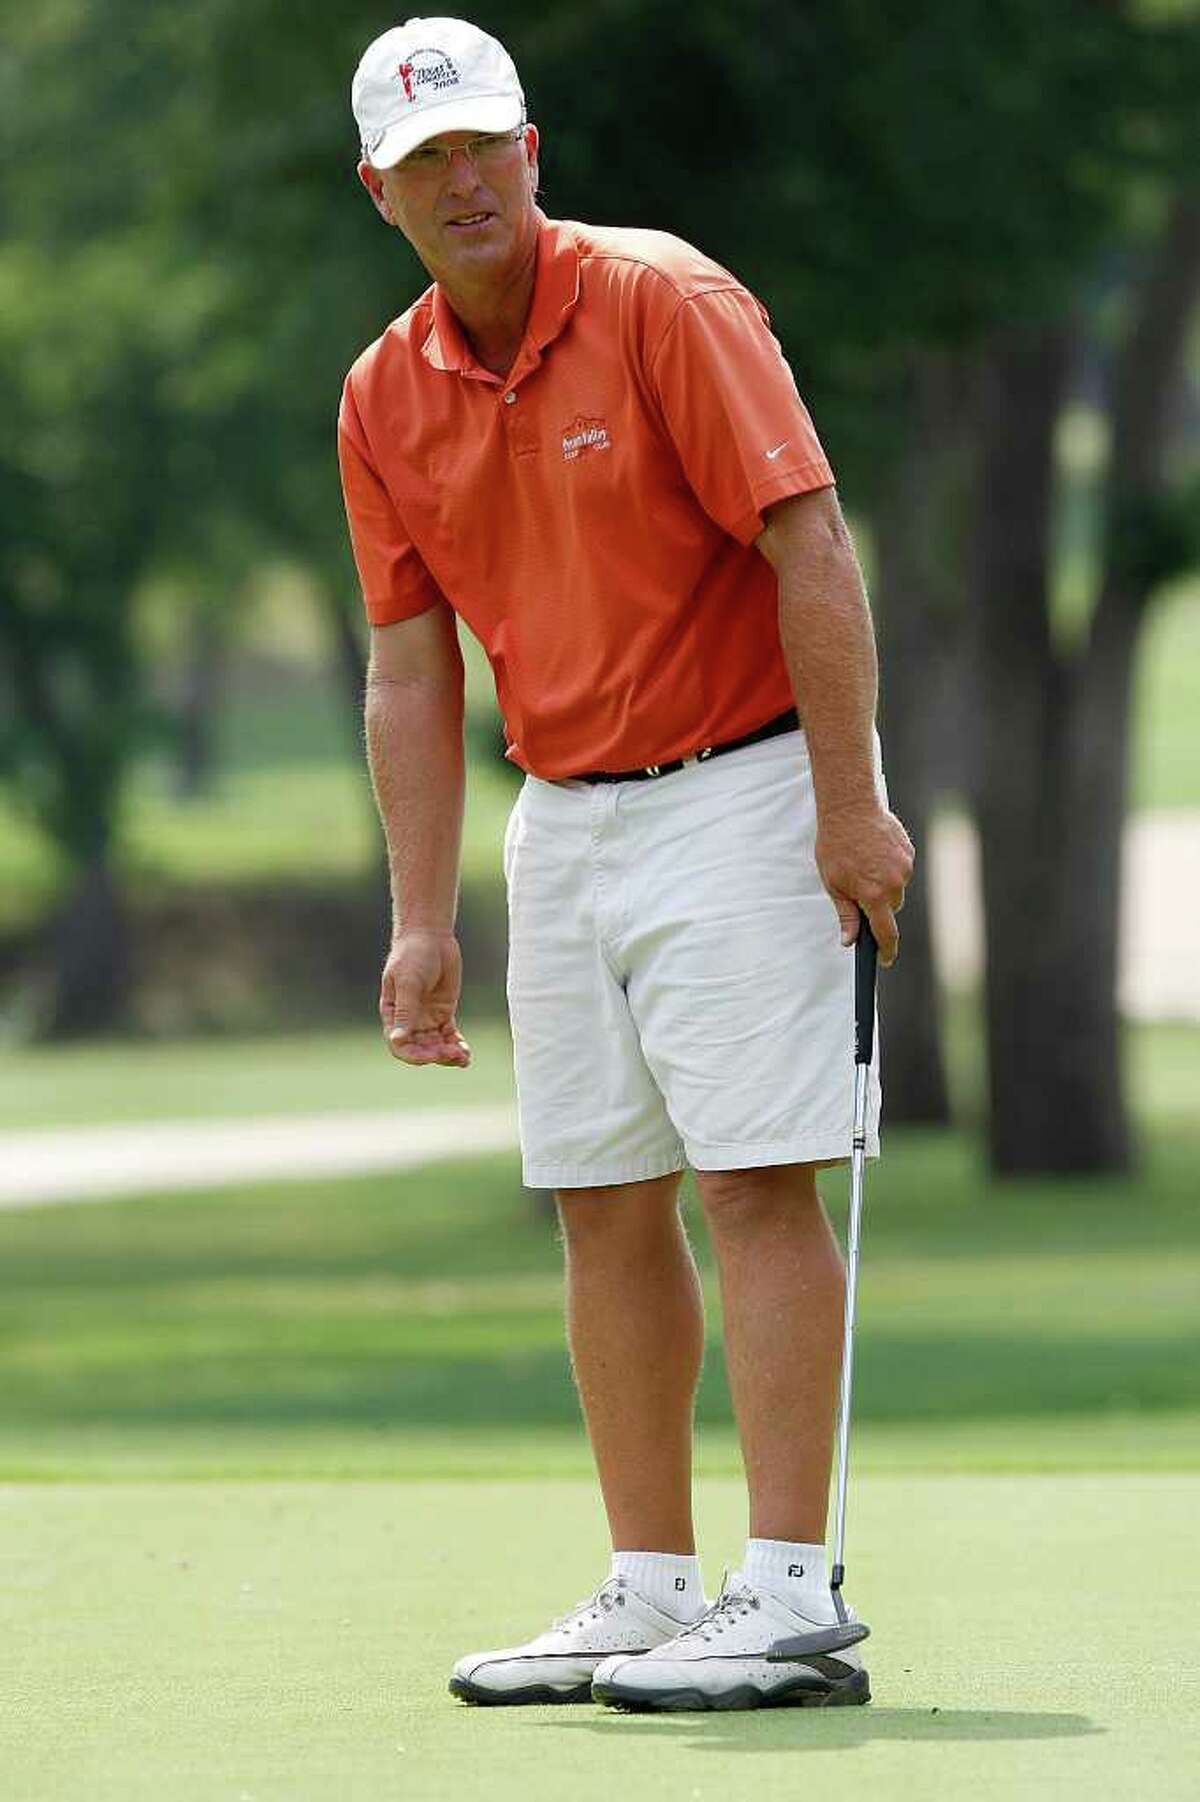 John Pierce watches his putt on the tenth green during the final round of the Greater San Antonio Men's Mid-Amateur Championship at Pecan Valley Golf Course, Sunday, May 22, 2011. JERRY LARA/glara@express-news.net